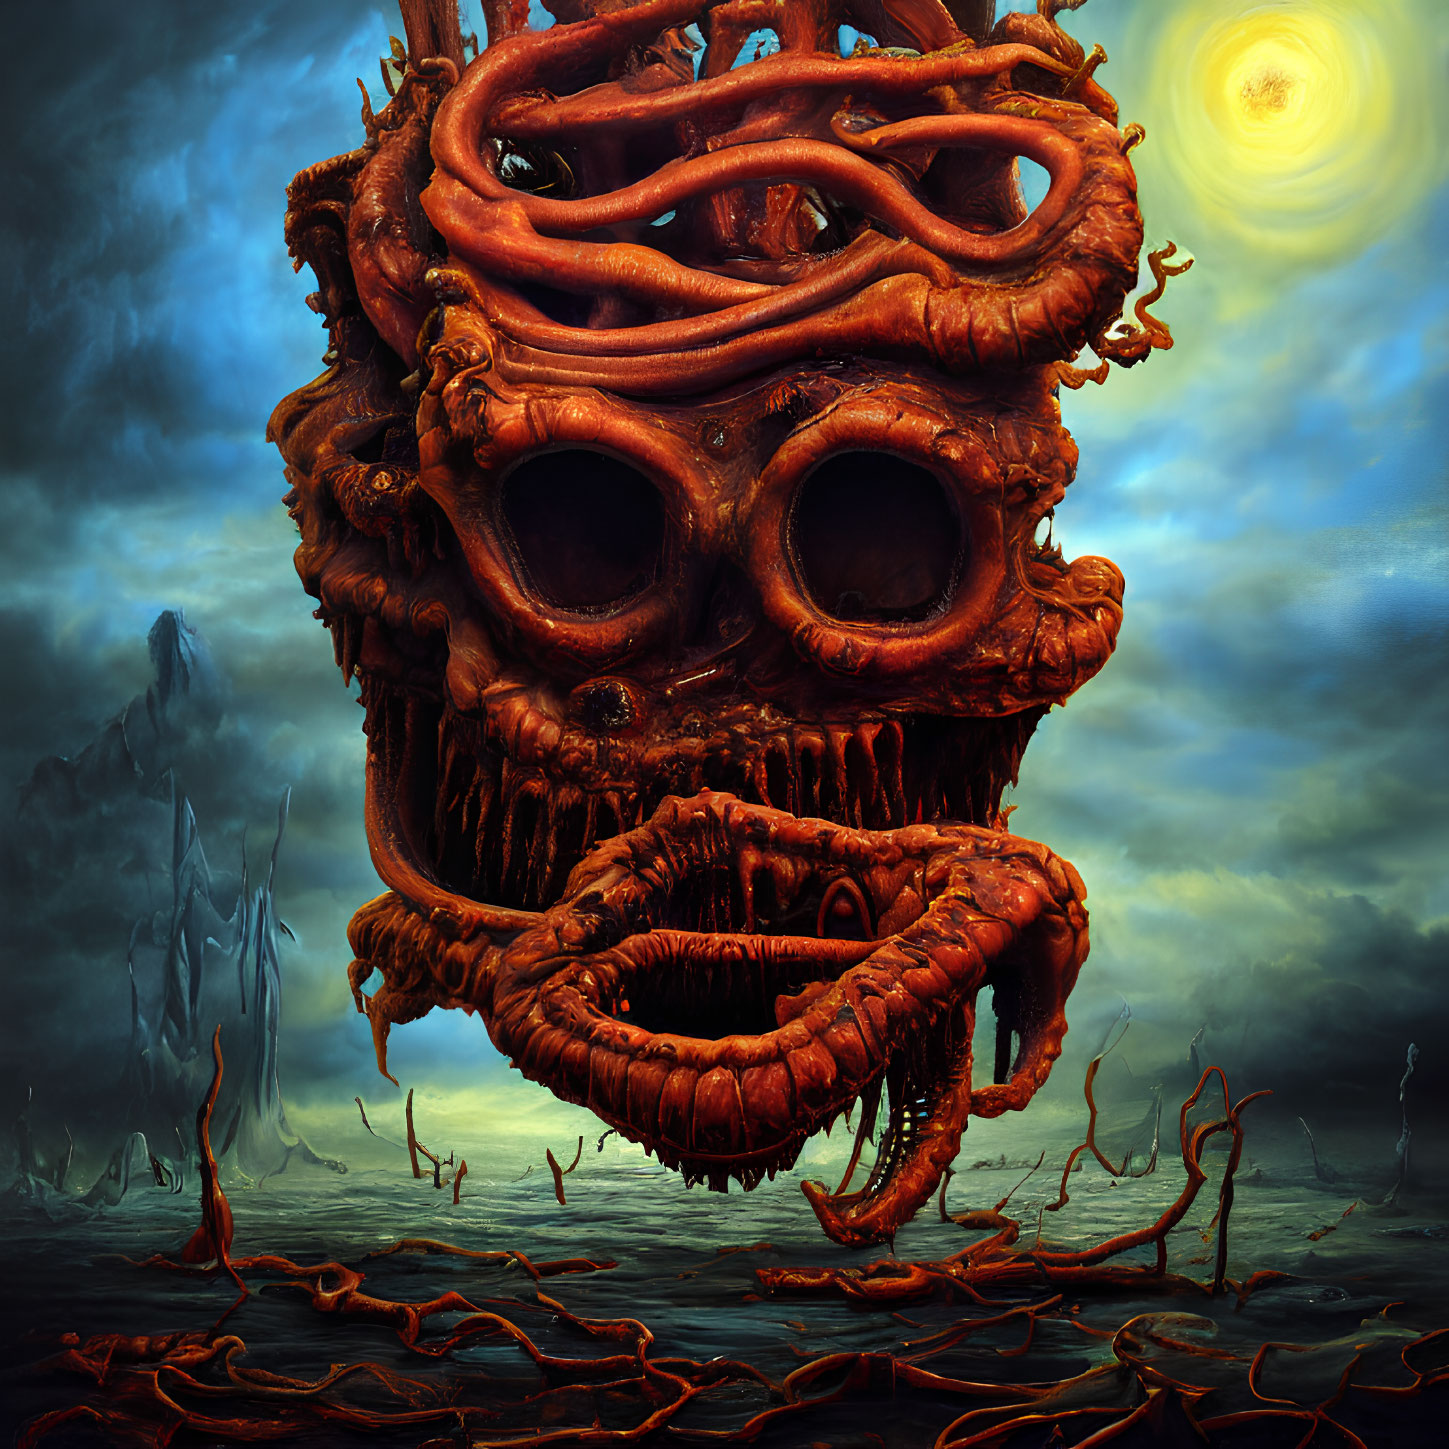 Nightmarish surreal landscape with monstrous face and tentacles under stormy sky